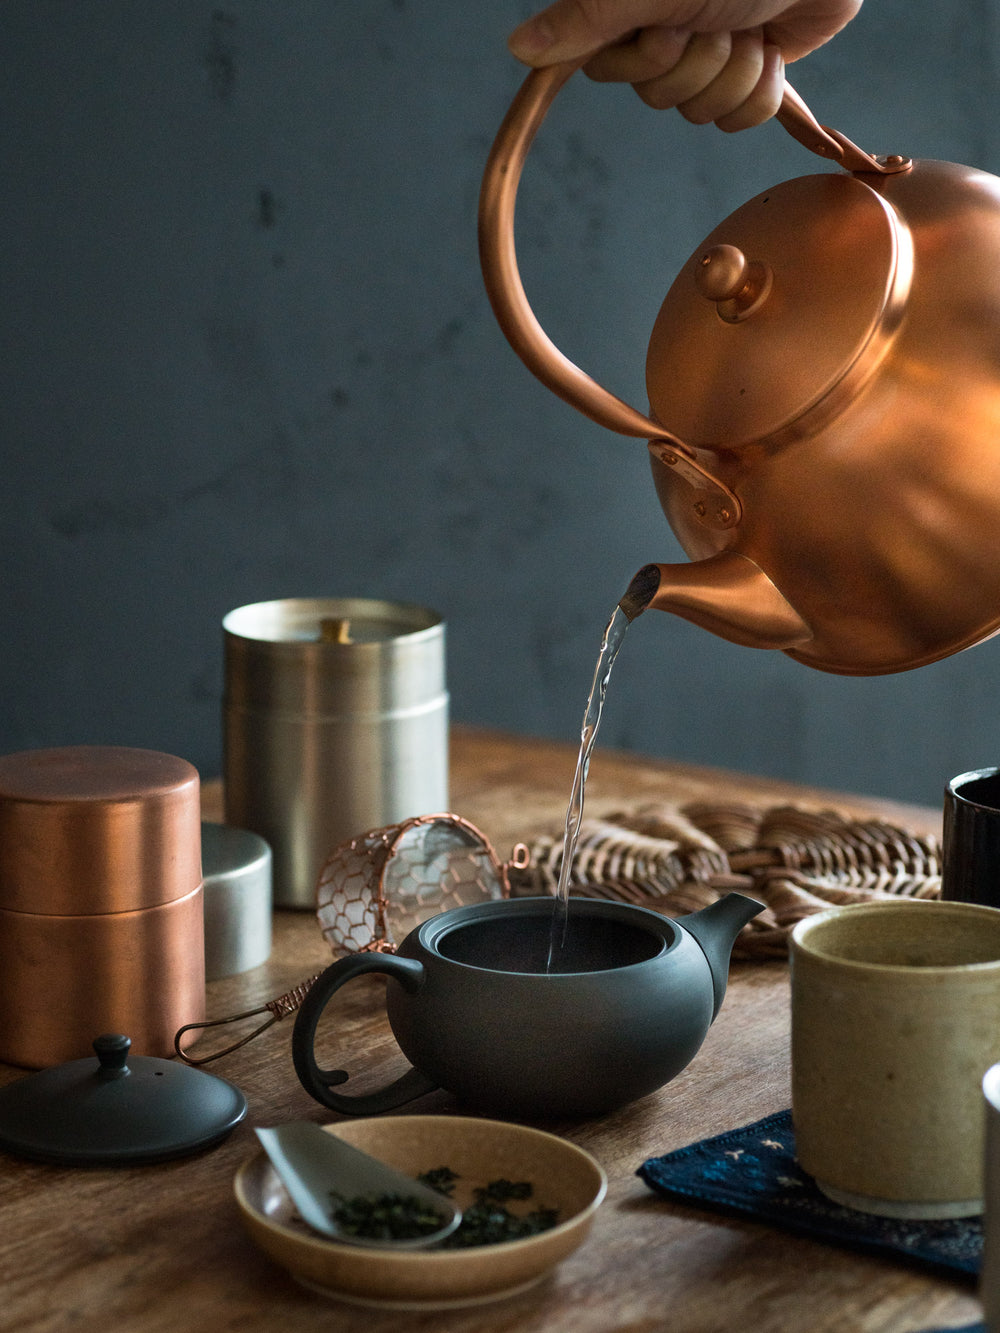 Copper kettle pouring tea into a teapot next to ceramic cups and copper tea canisters